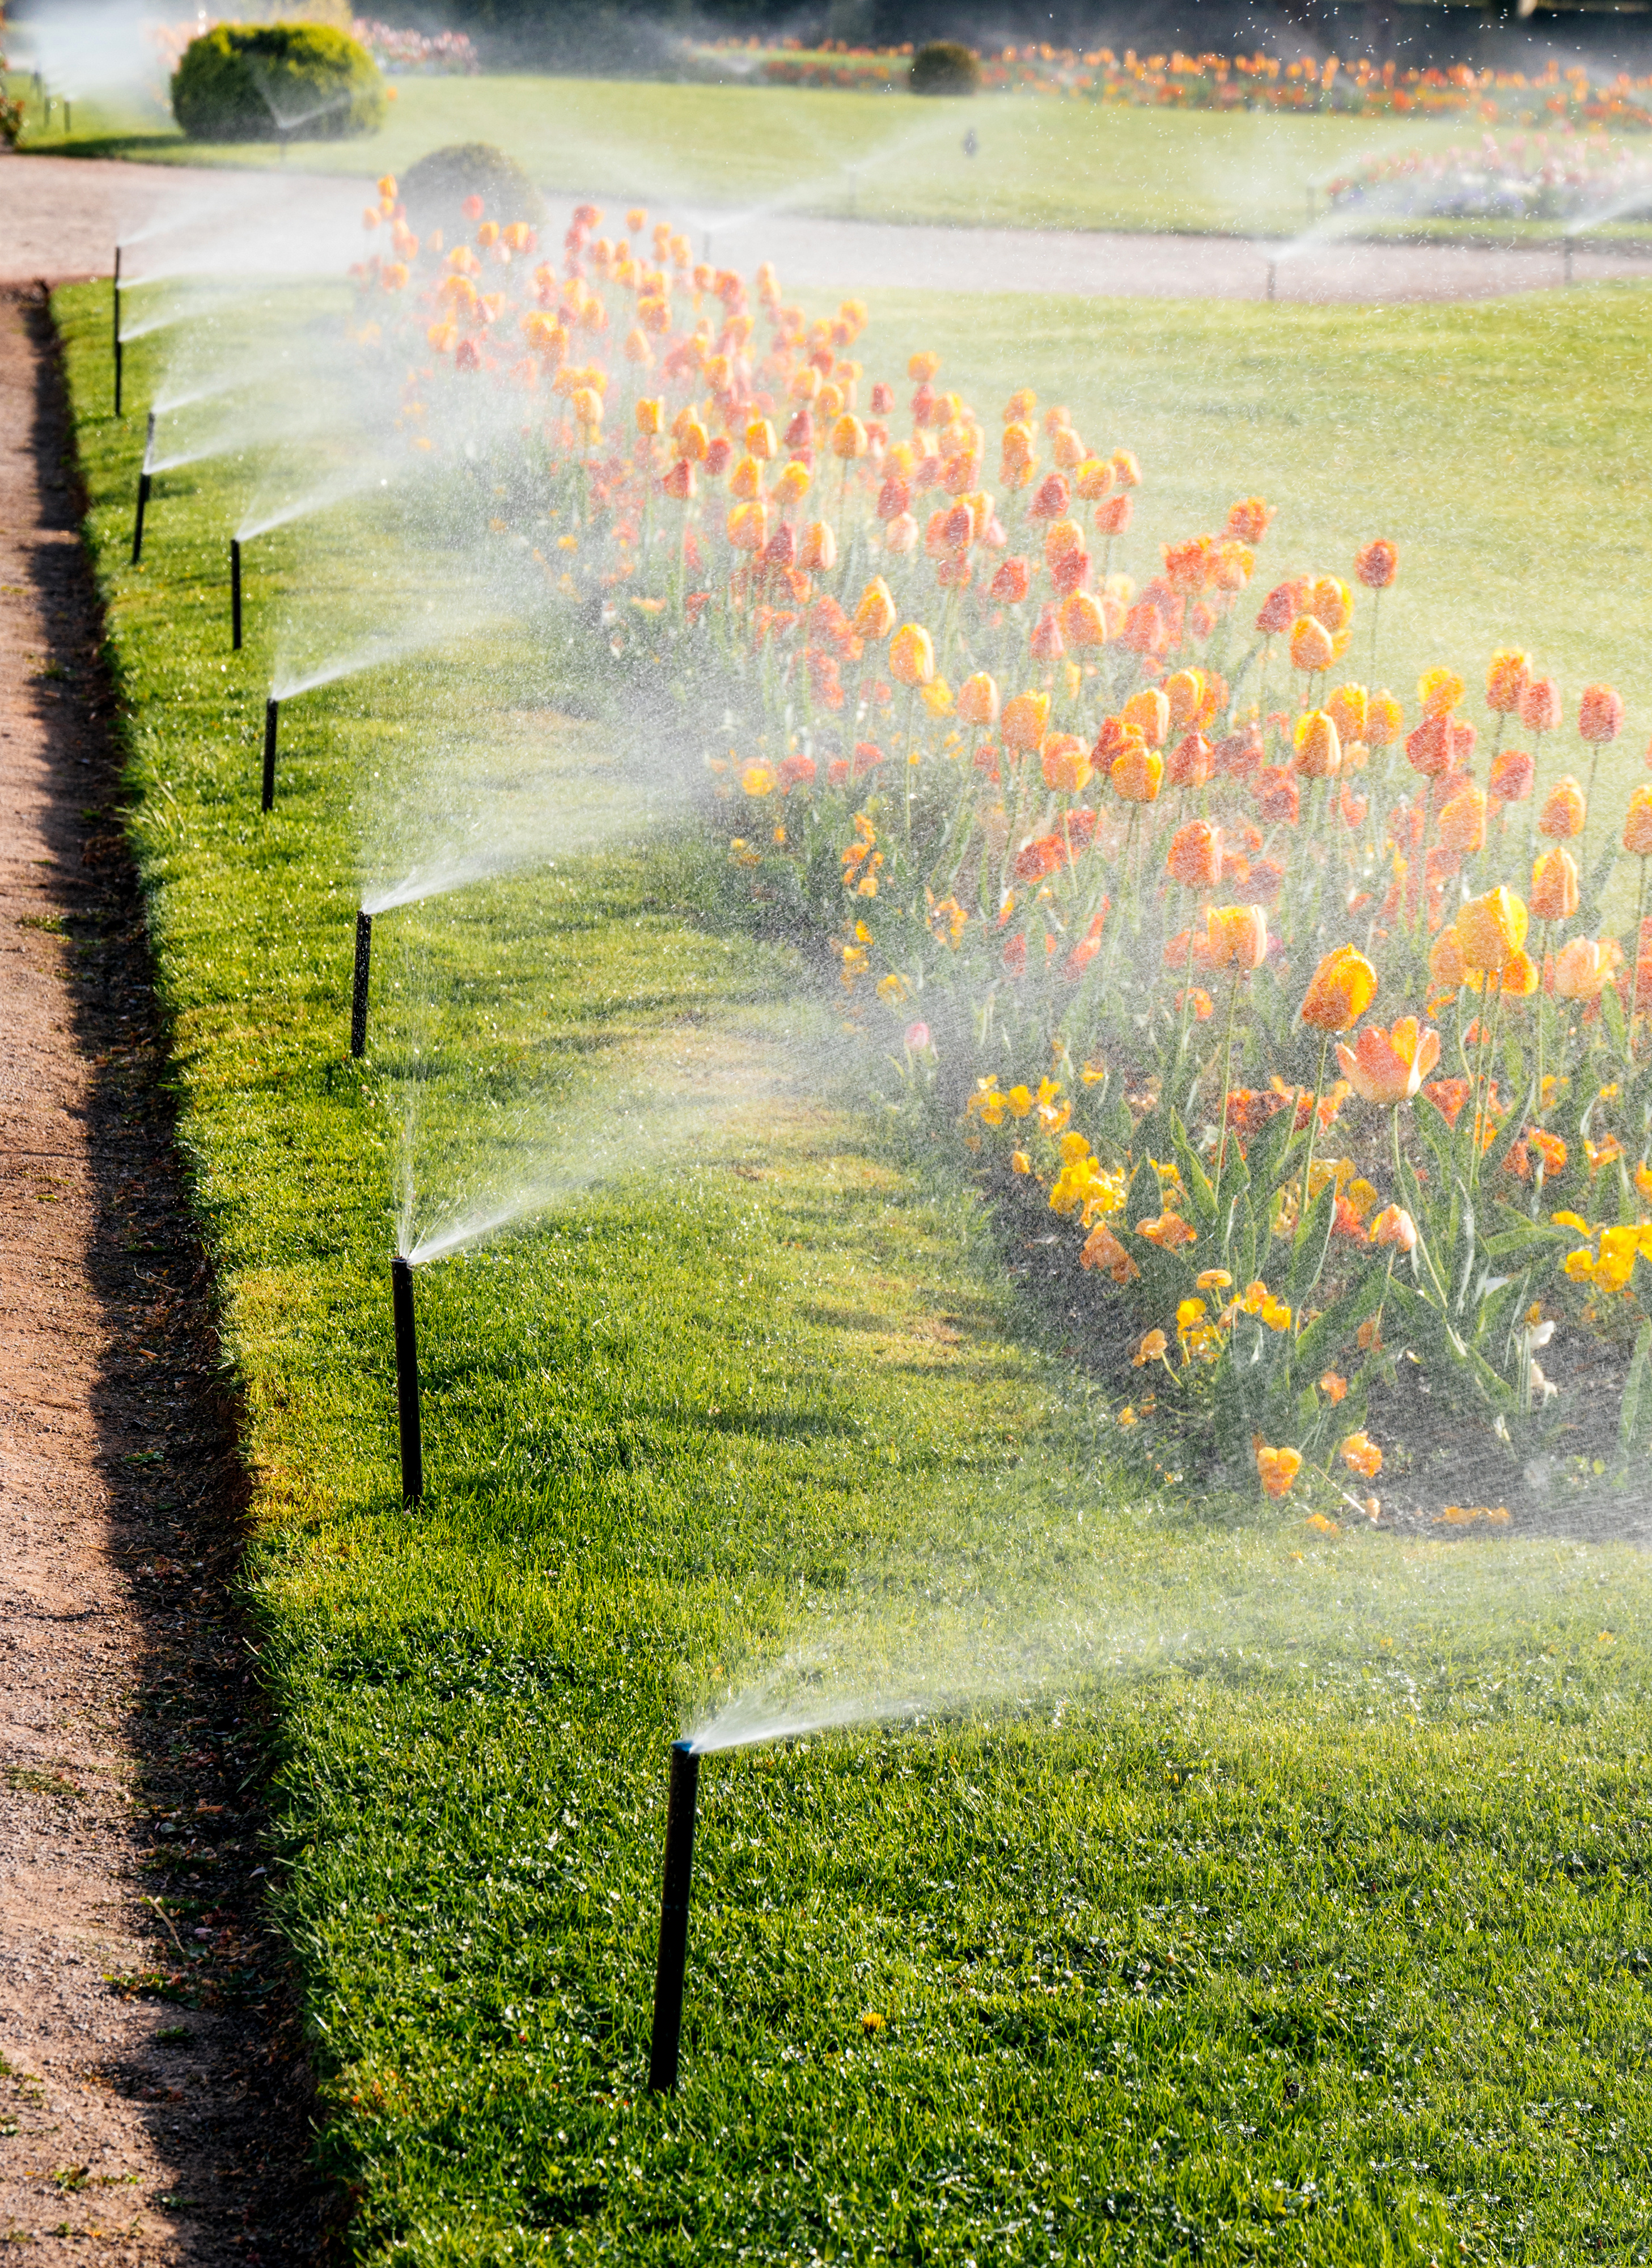 A garden with flowers and sprinklers on the grass.